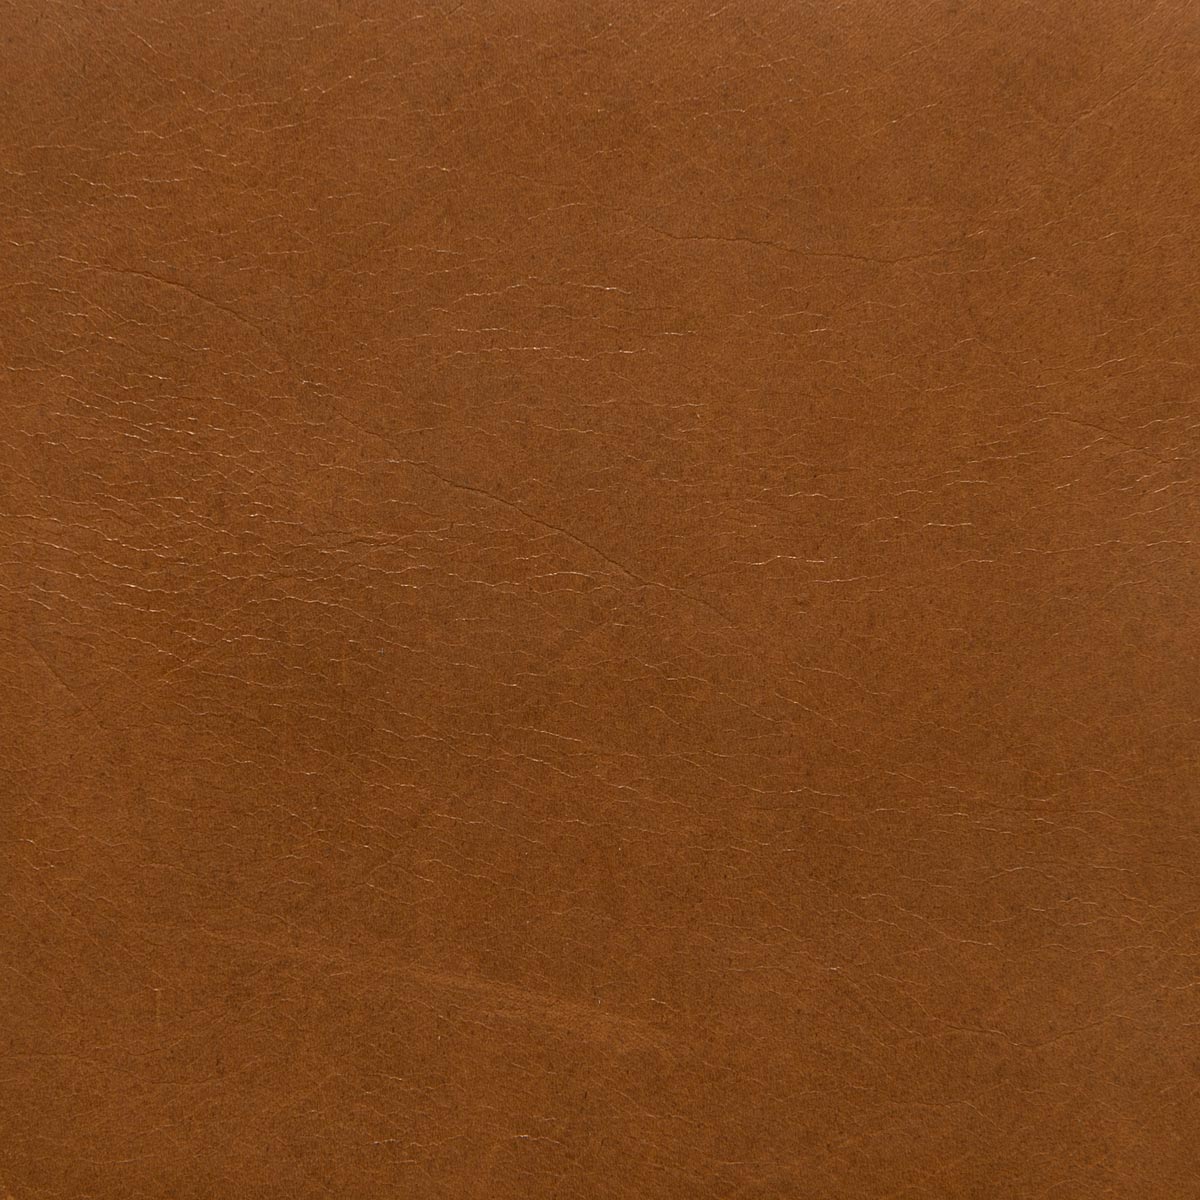 Provence - Full Grain Quality Leather - Jamie Stern Design